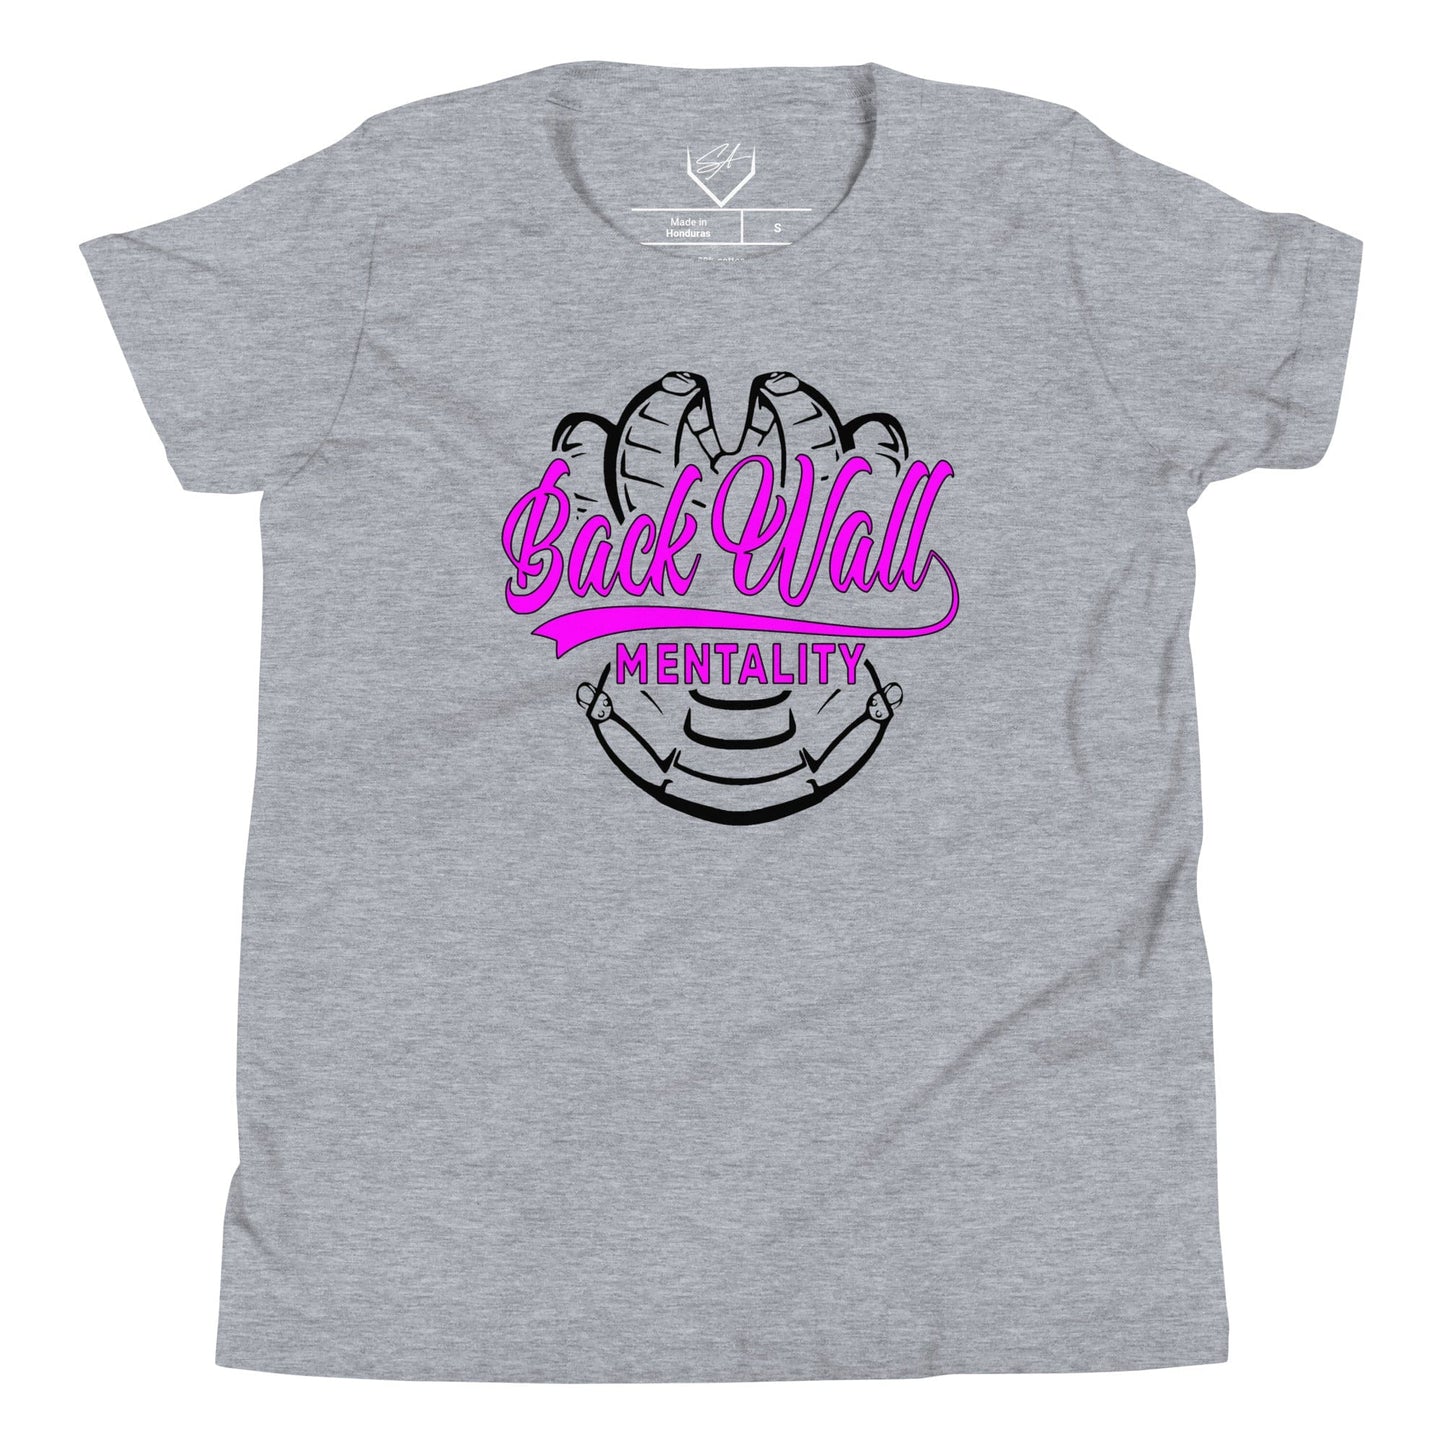 Backwall Mentality Pink - Youth Tee